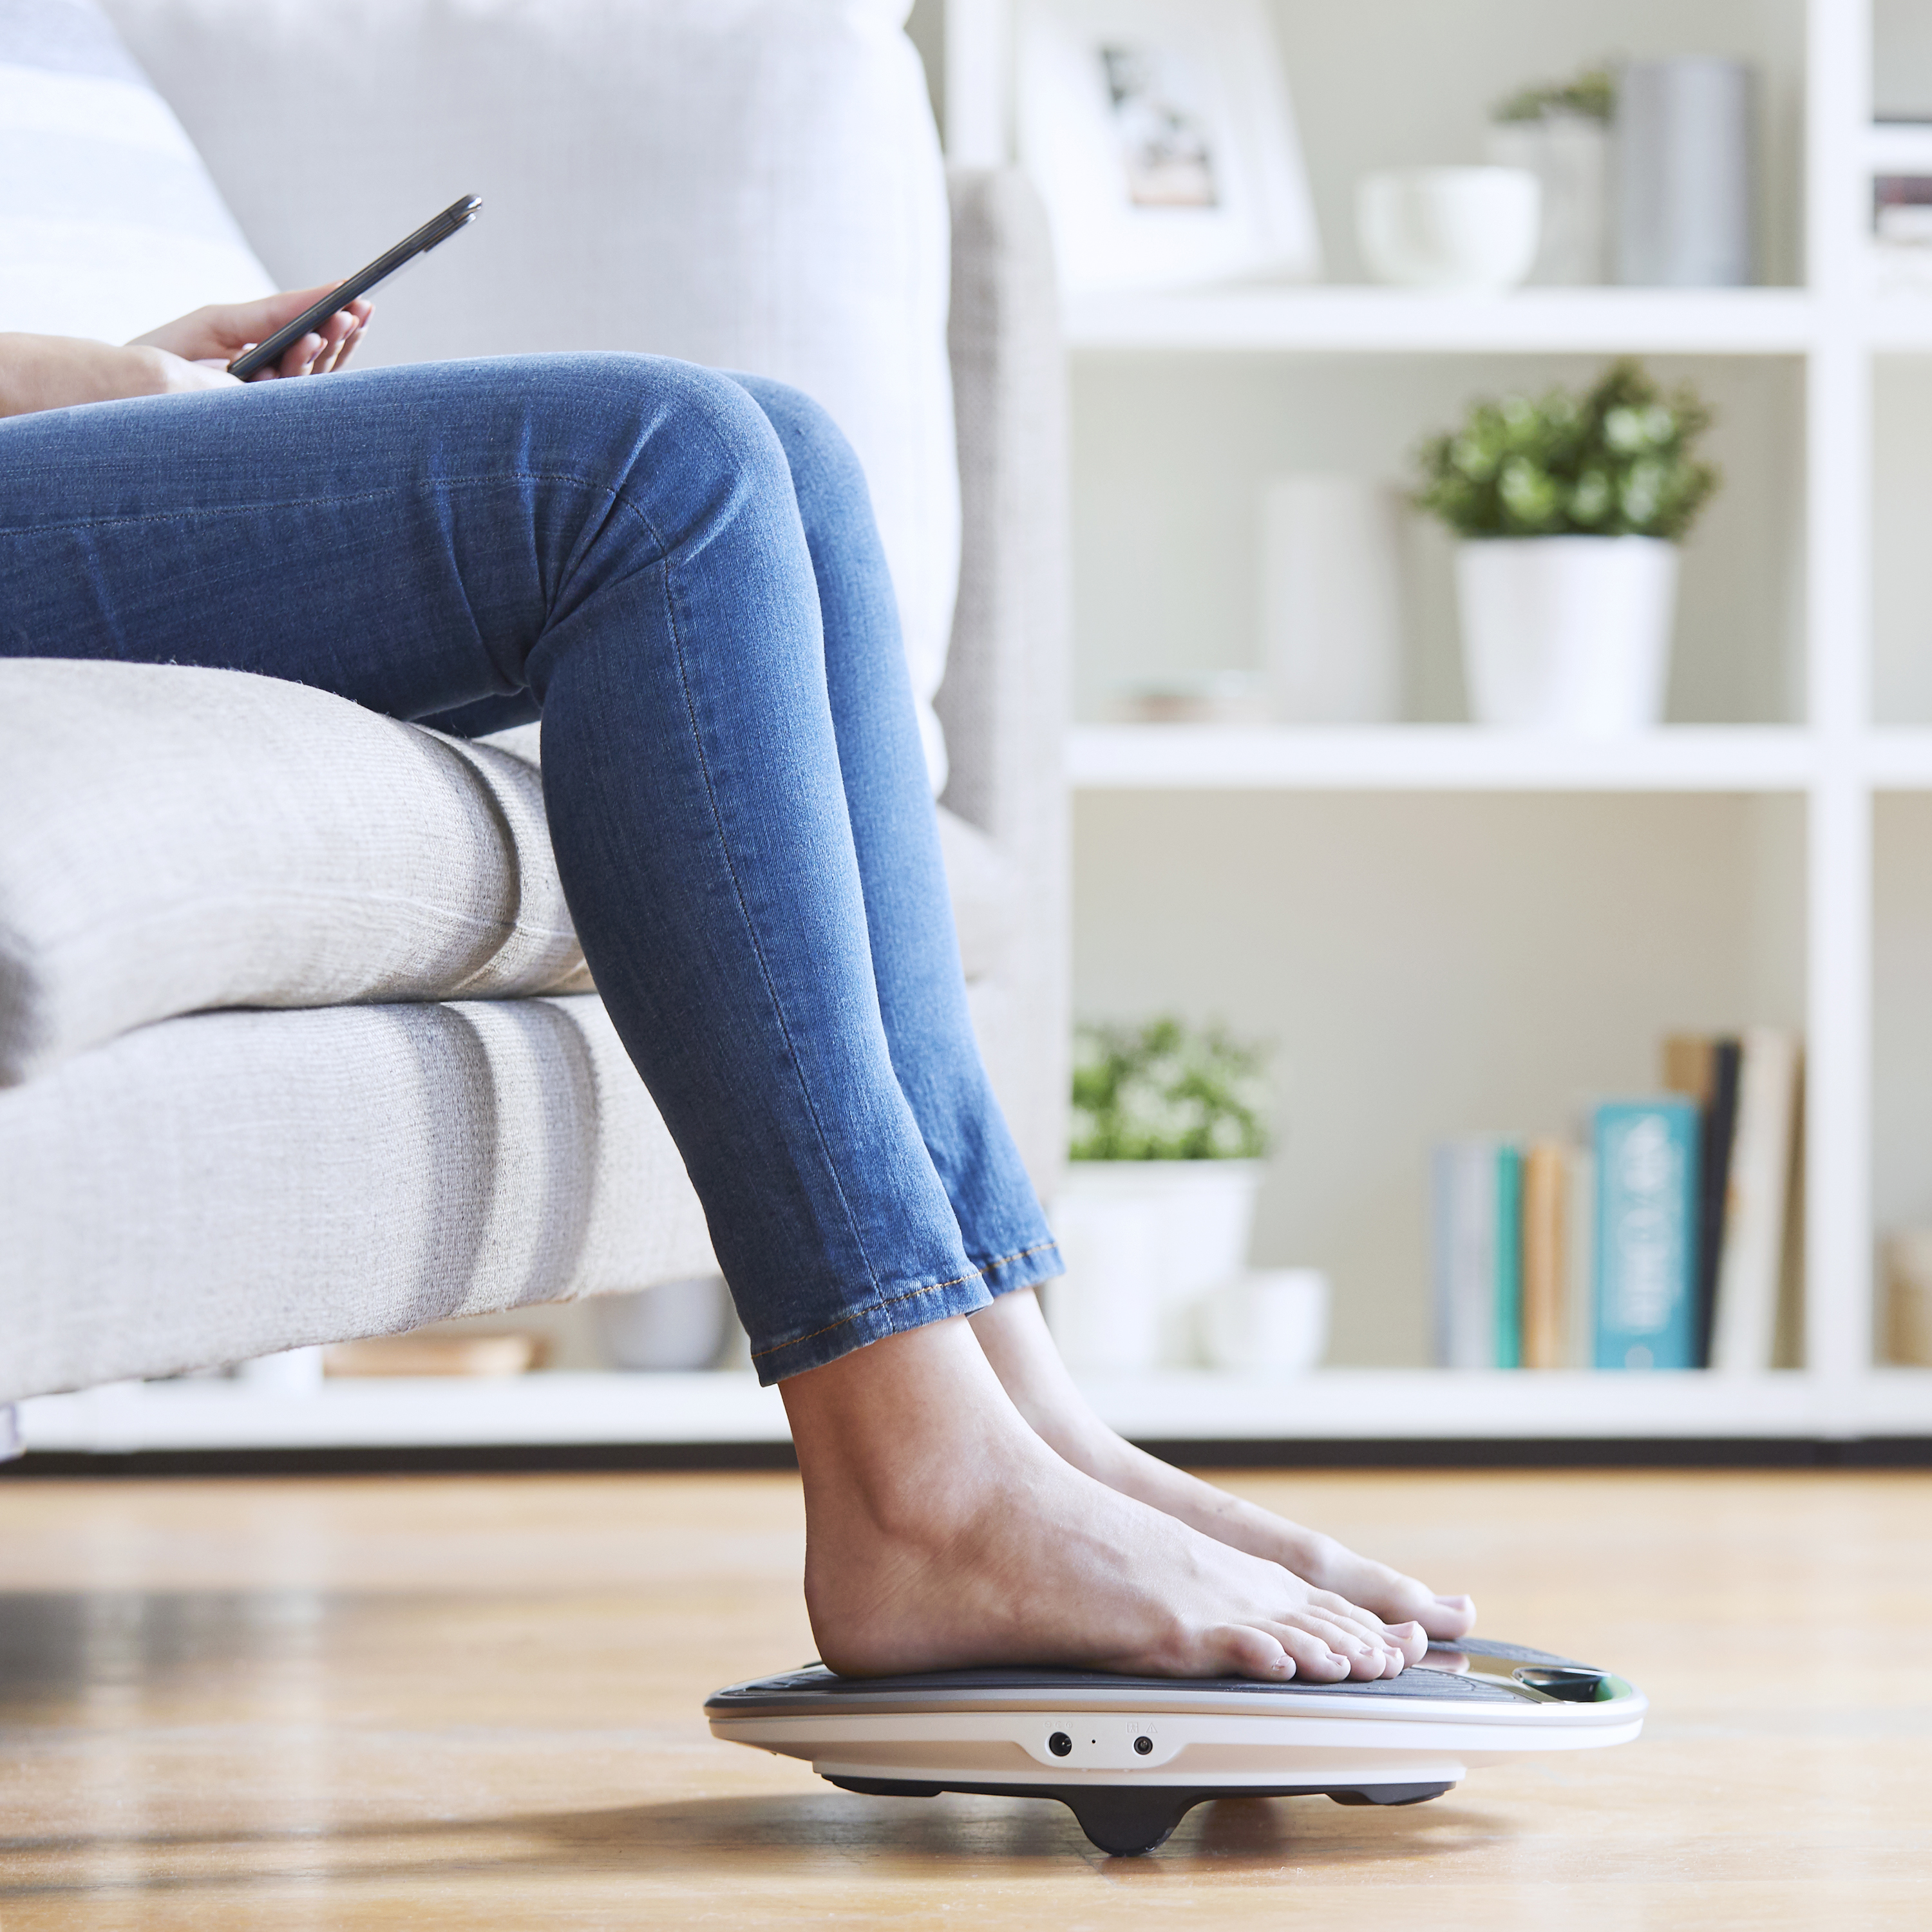 Person sitting on couch using a foot muscle stimulation device